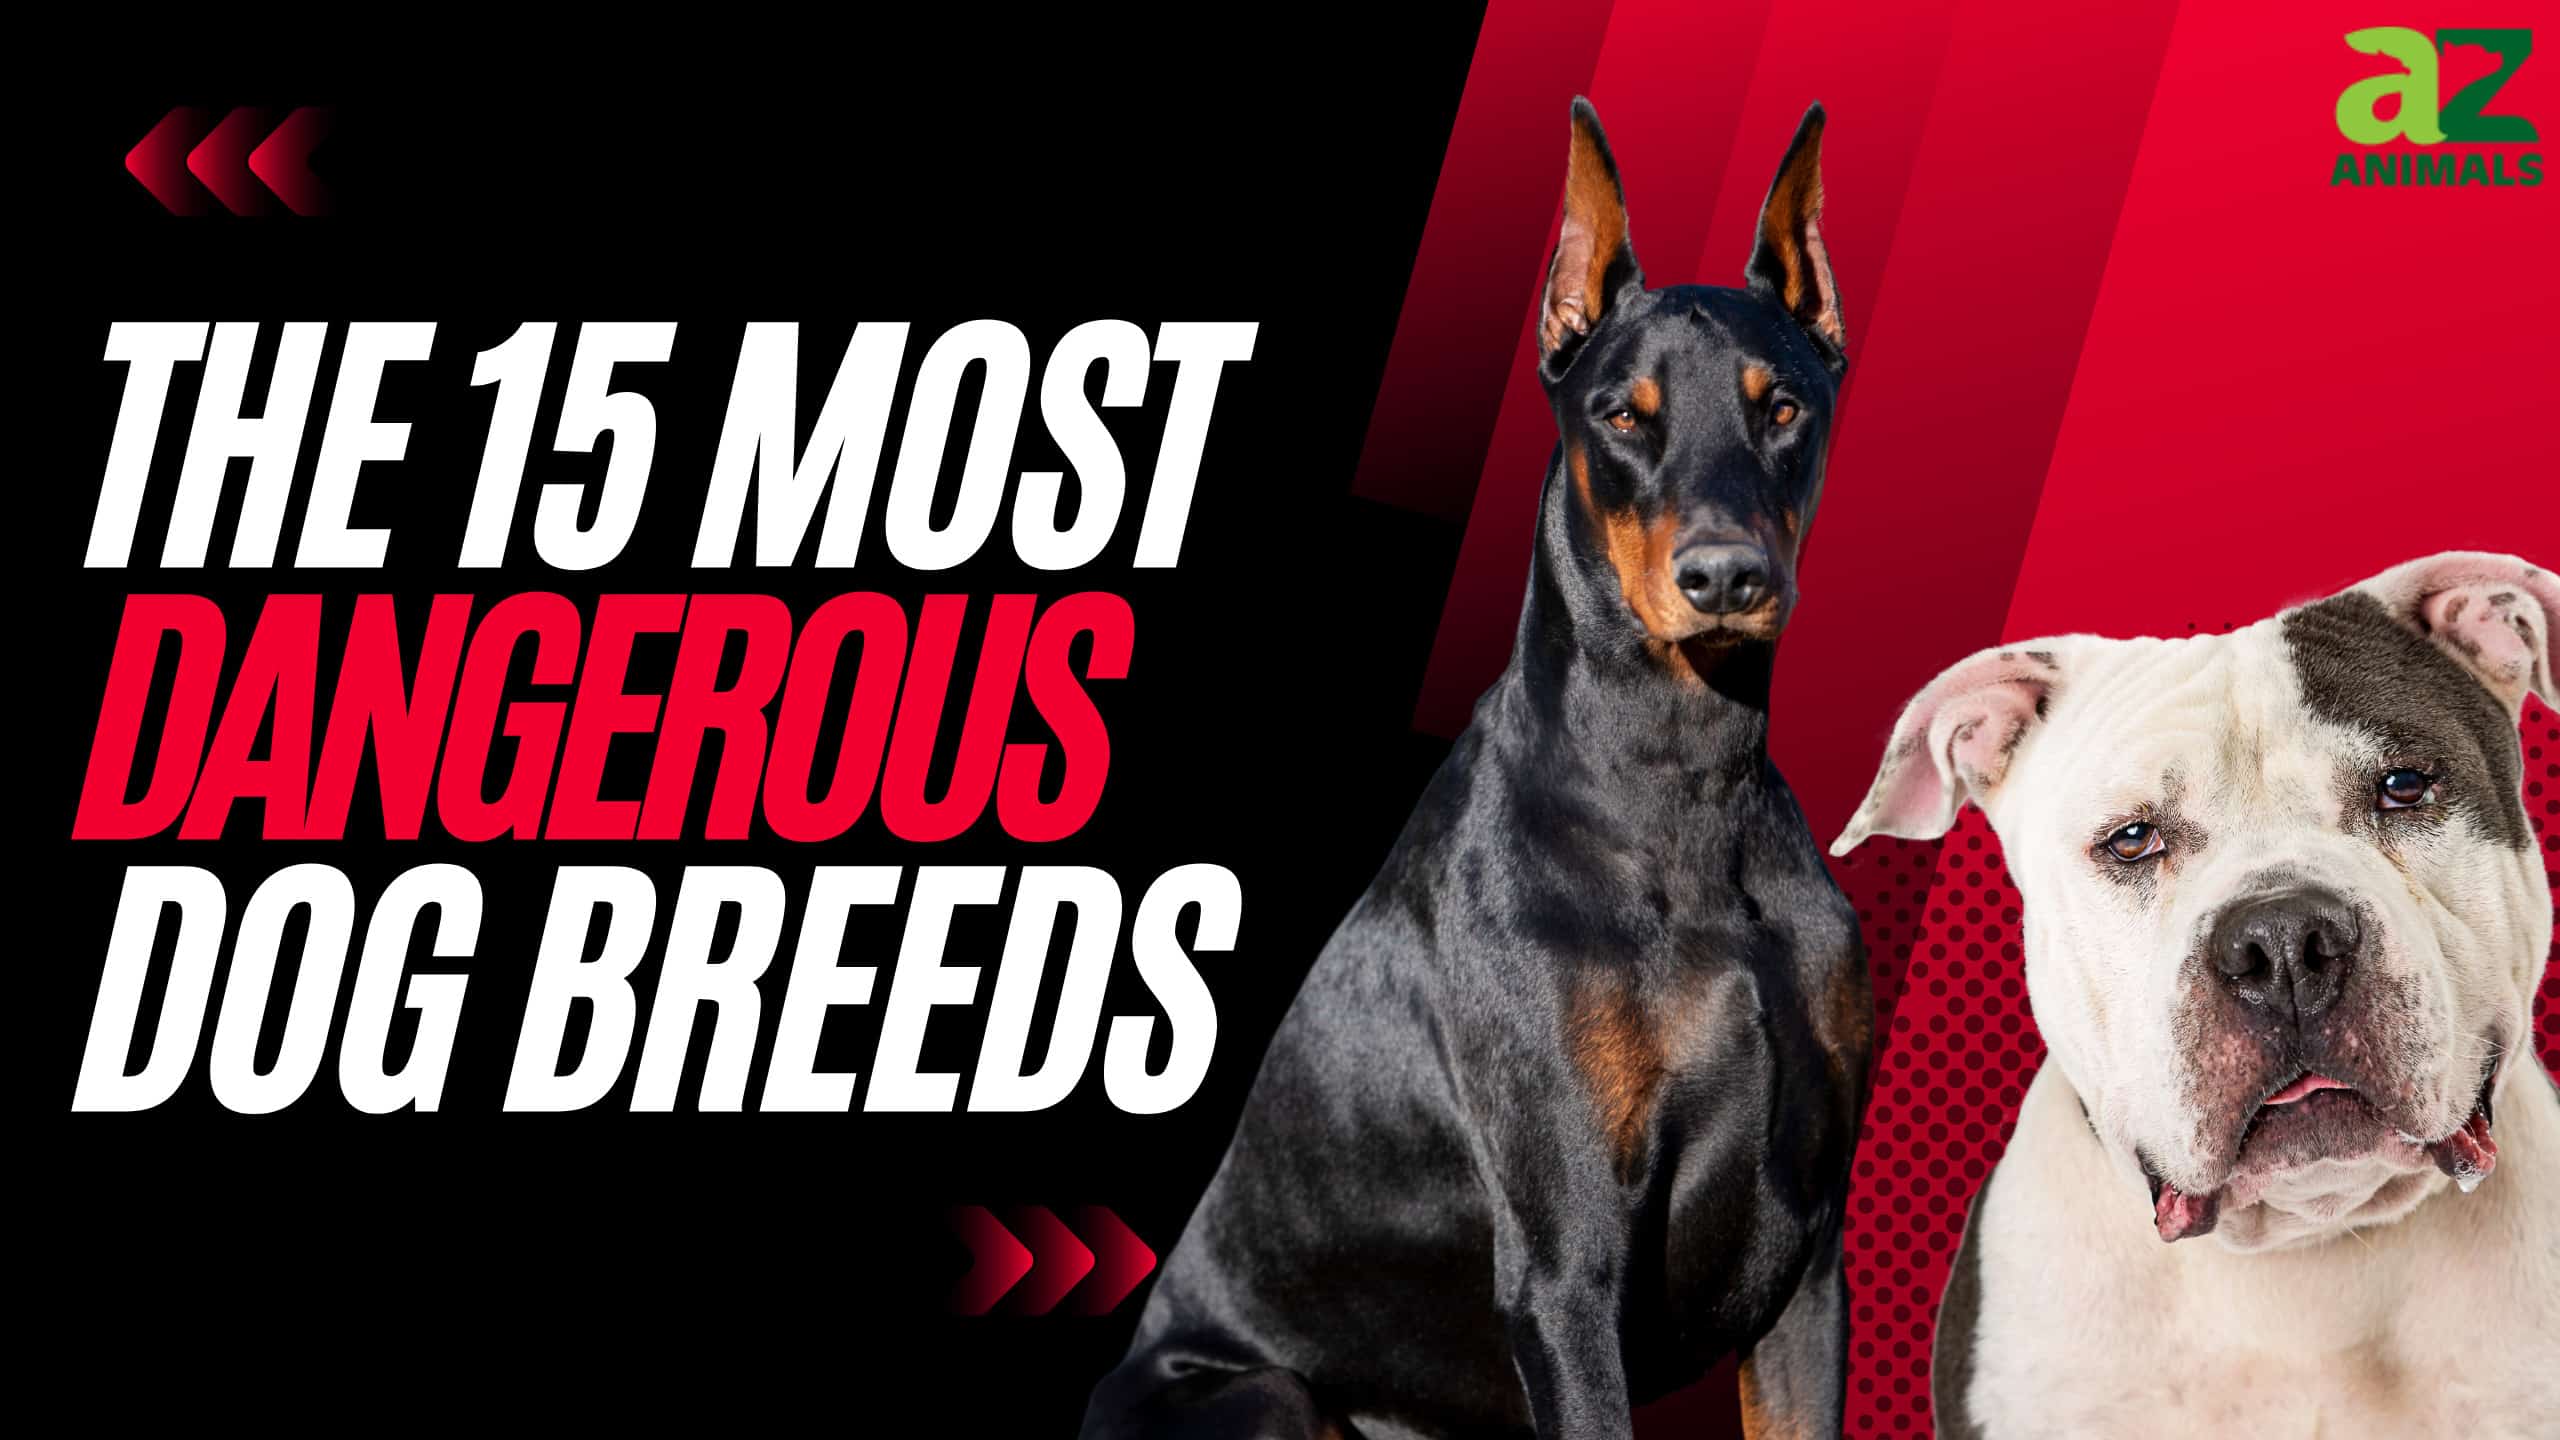 The Most Dangerous Dog Breeds